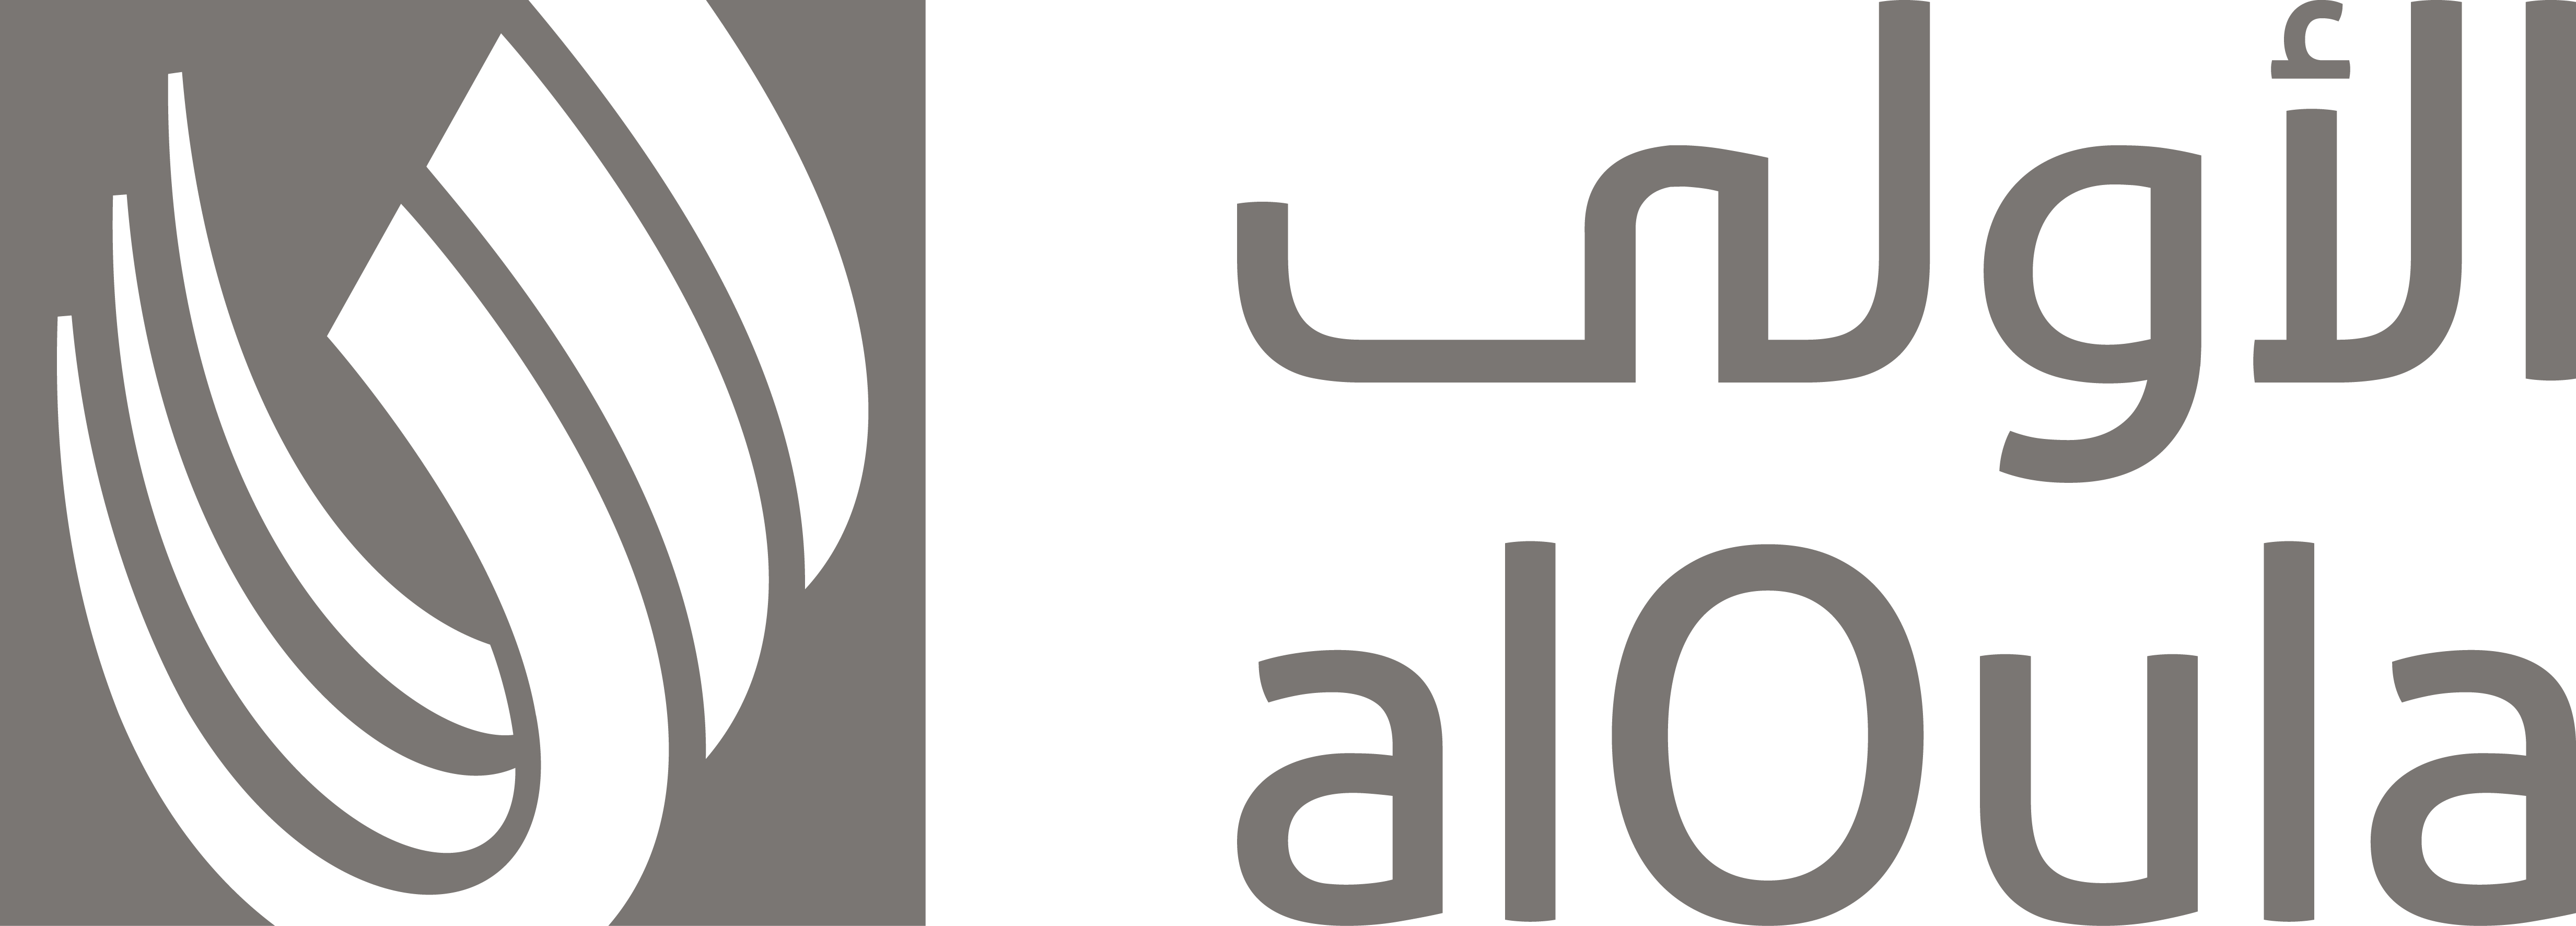 AlOula Homes begins the site preparation work for its “Al-Rabiah” project